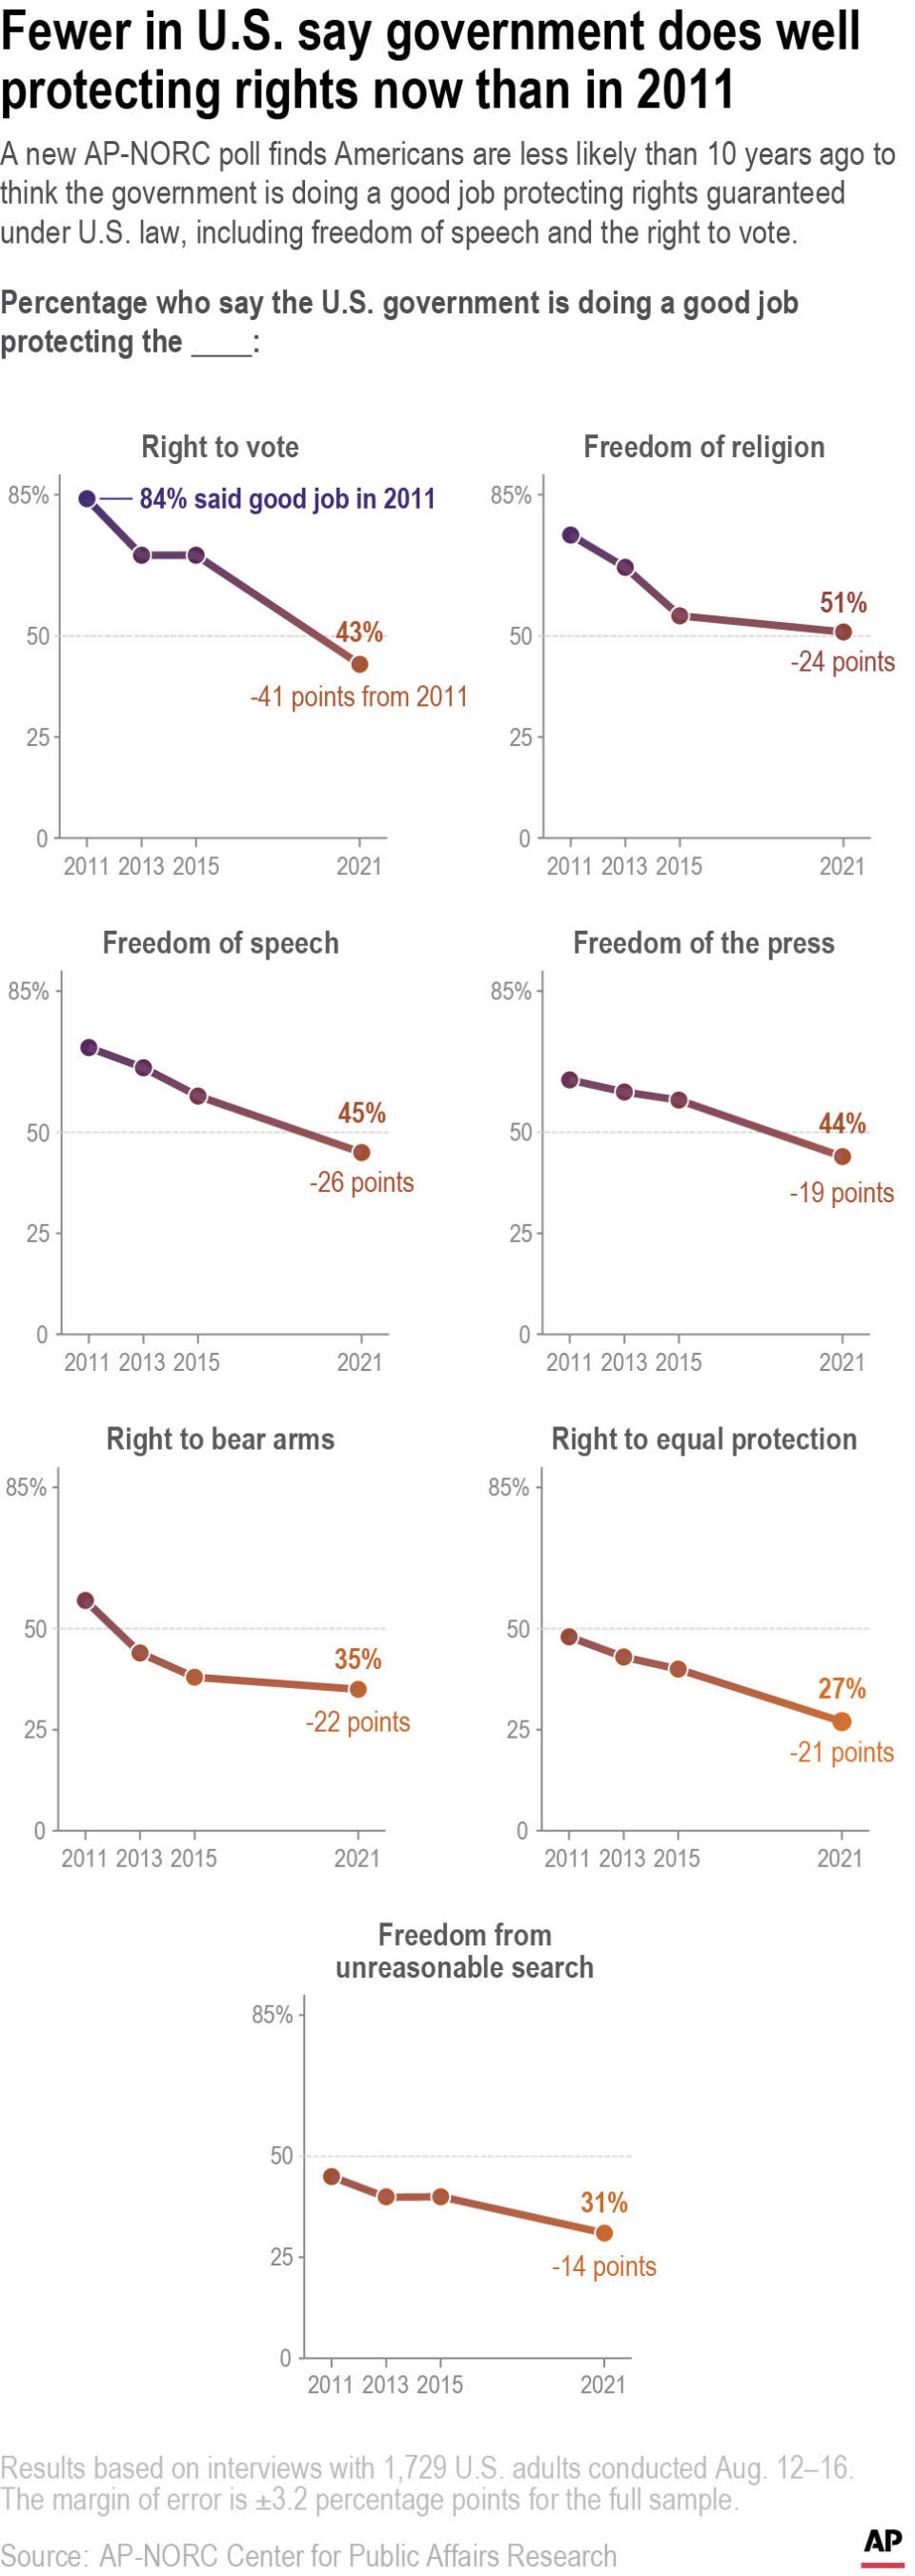 A new AP-NORC poll finds Americans are less likely than 10 years ago to think the government is doing a good job protecting rights guaranteed under U.S. law, including freedom of speech and the right to vote.